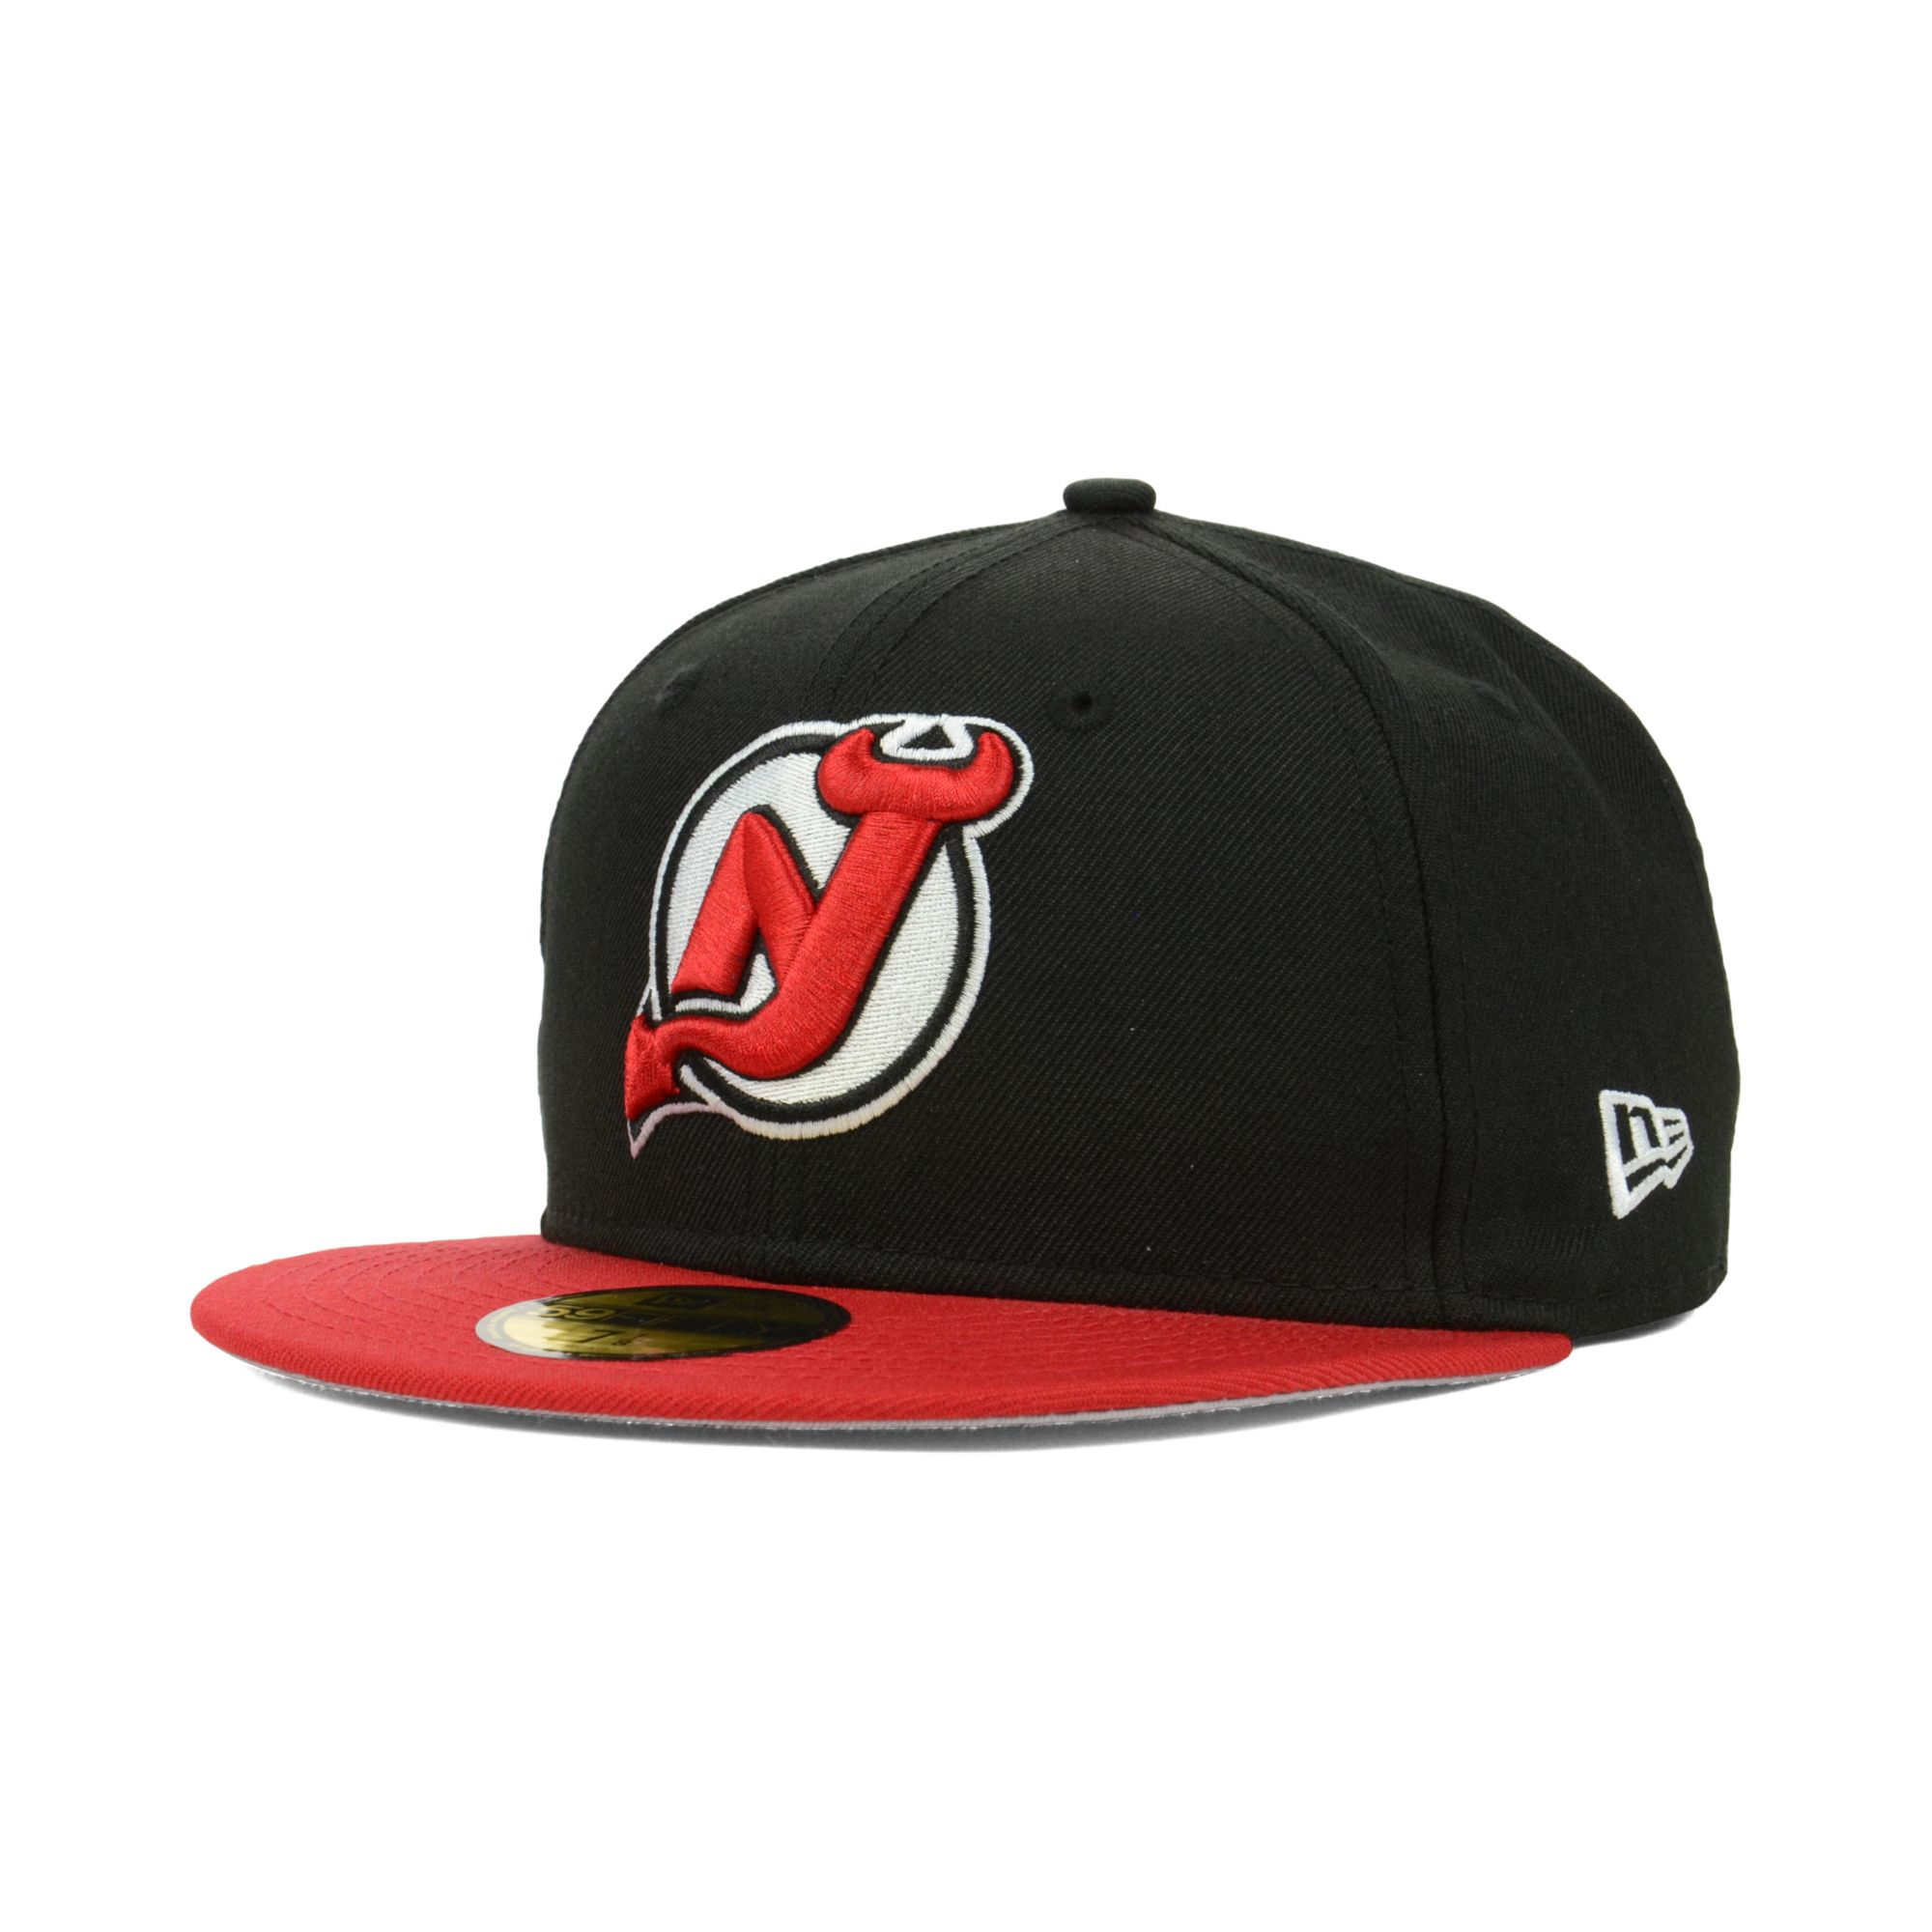 New Era 59FIFTY NJ DEVILS Hat Cap Fitted 6 3/4 Wool NHL New Jersey